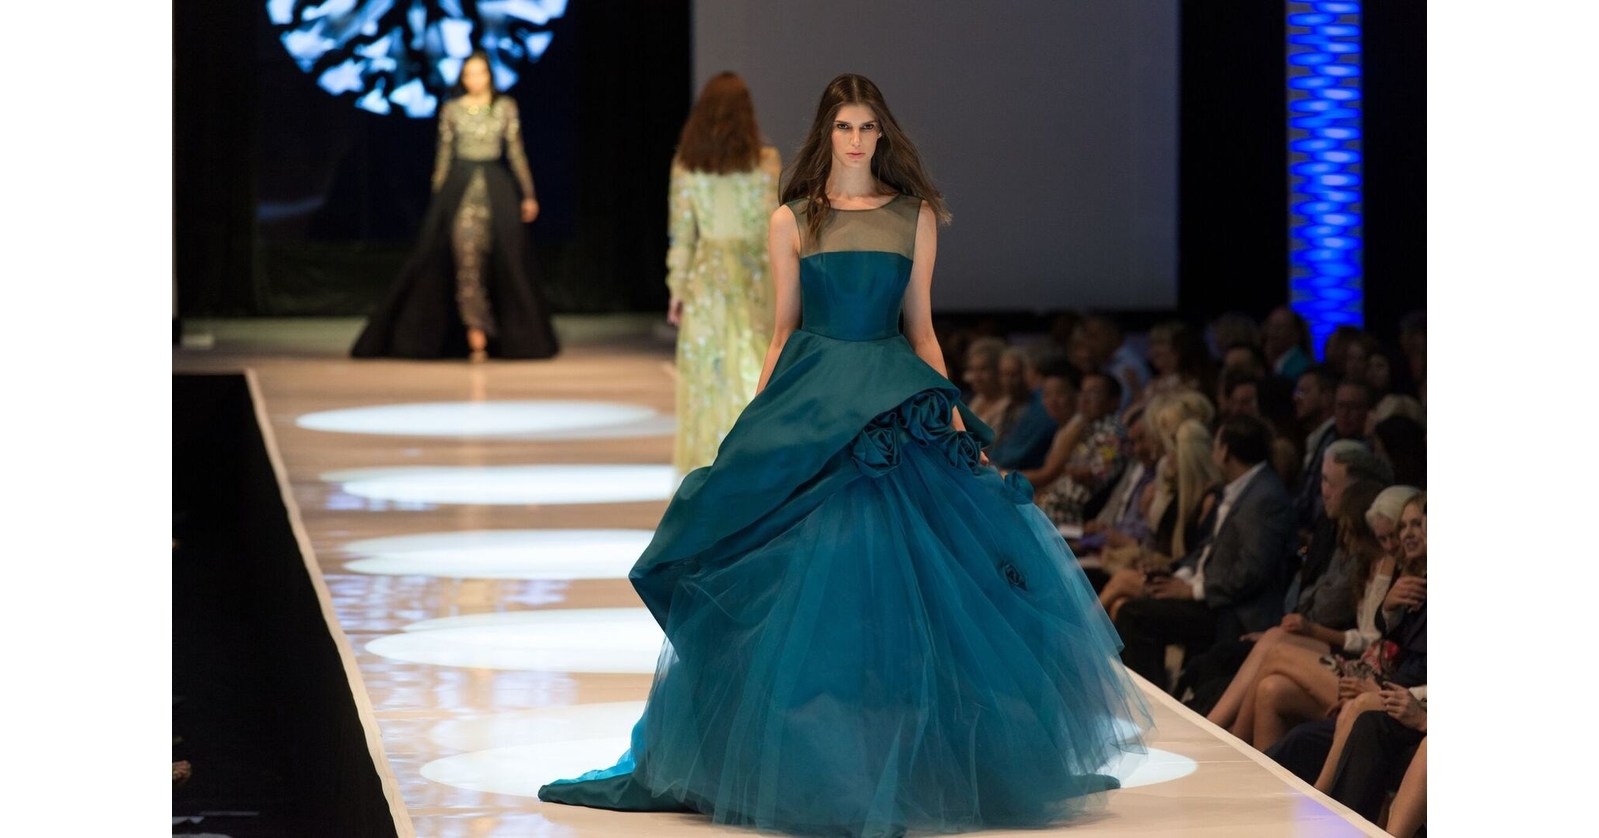 Public Invited to Experience Fashion Week El Paseo with Digital Livestreams